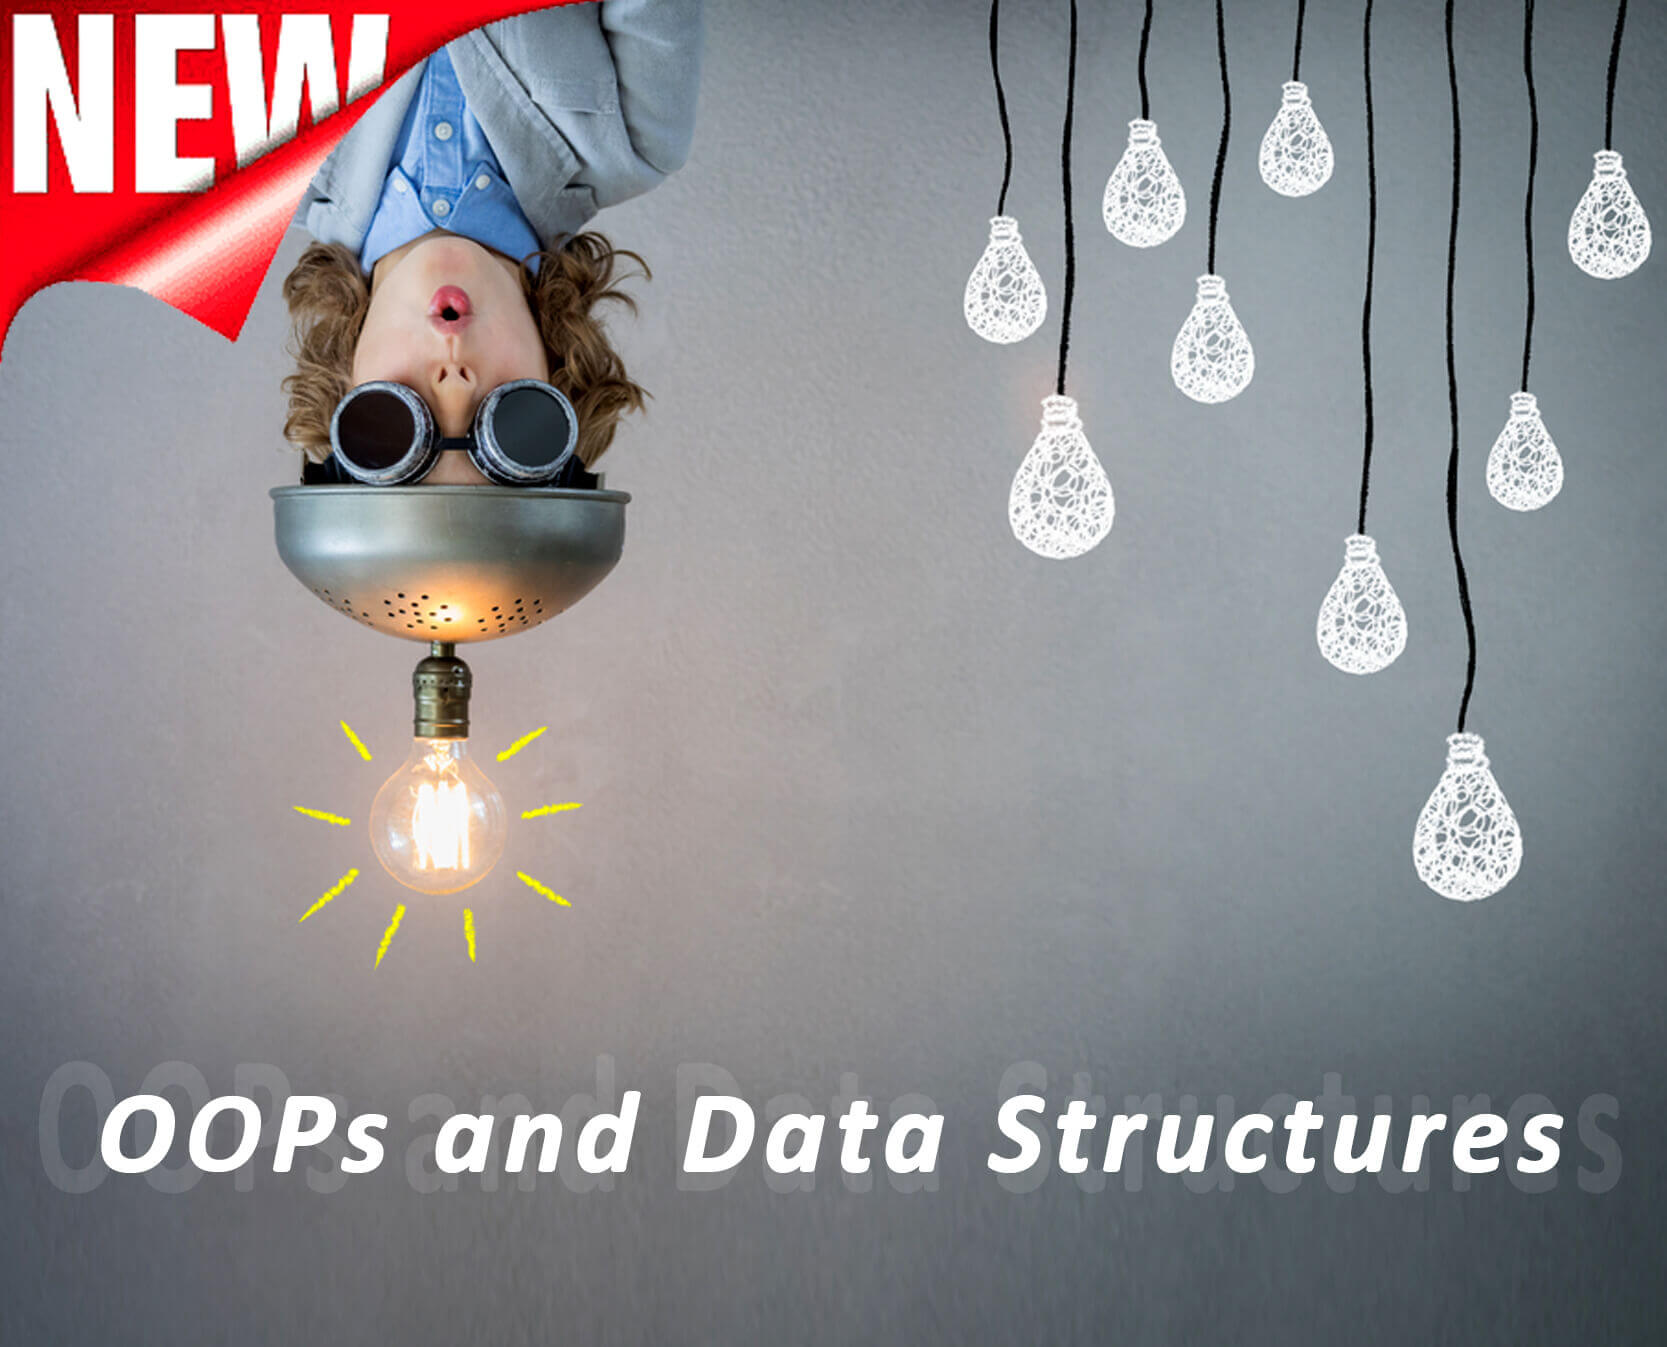 OOPs and Data Structures